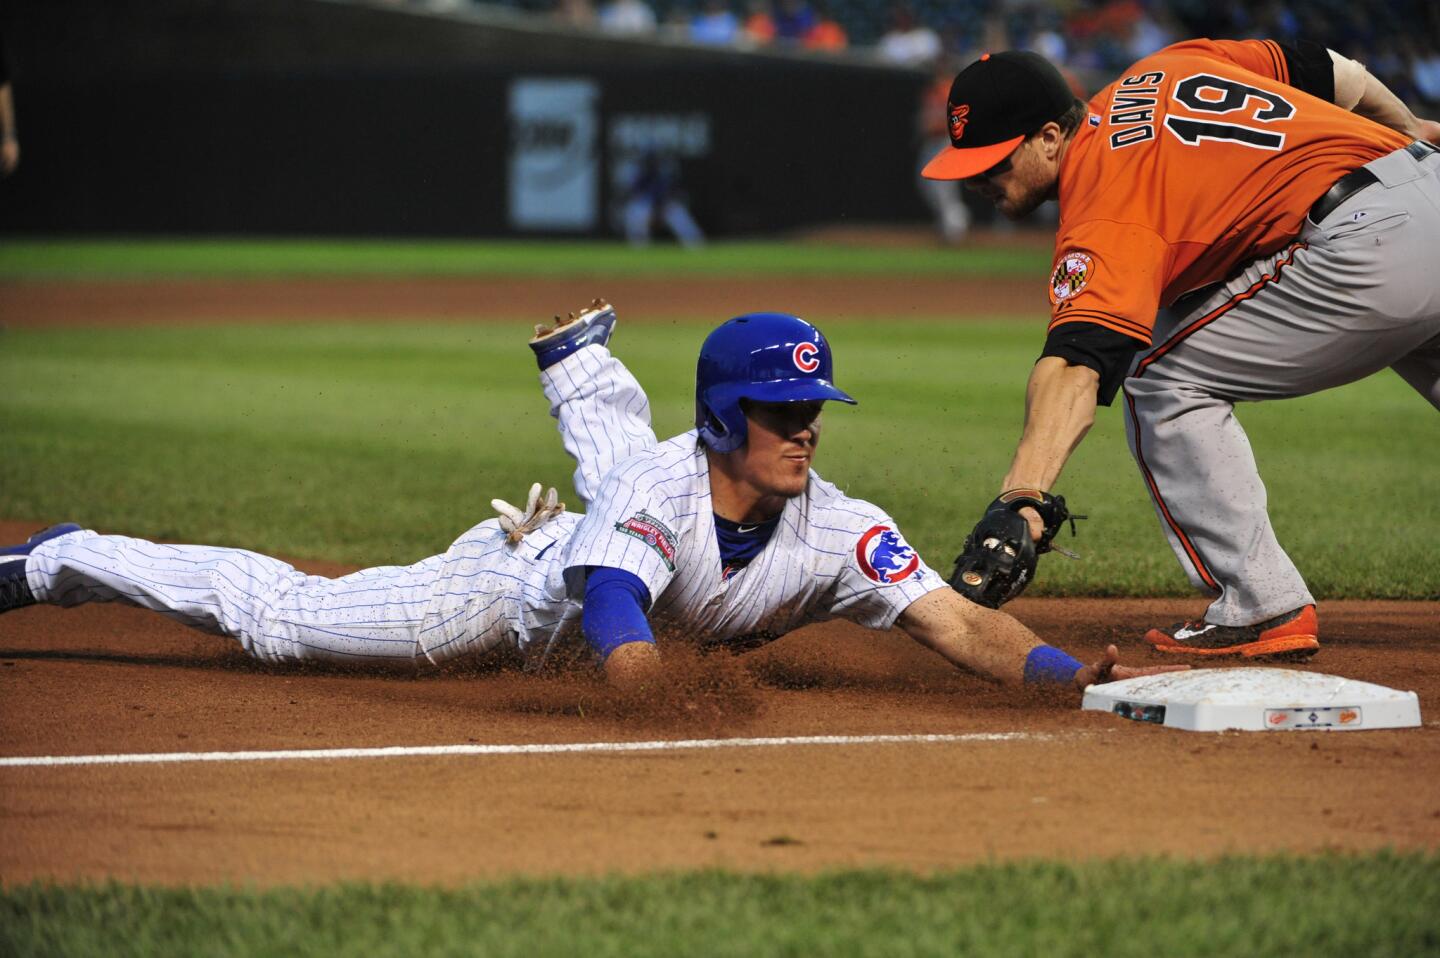 Chris Valaika is tagged out during the eighth inning.